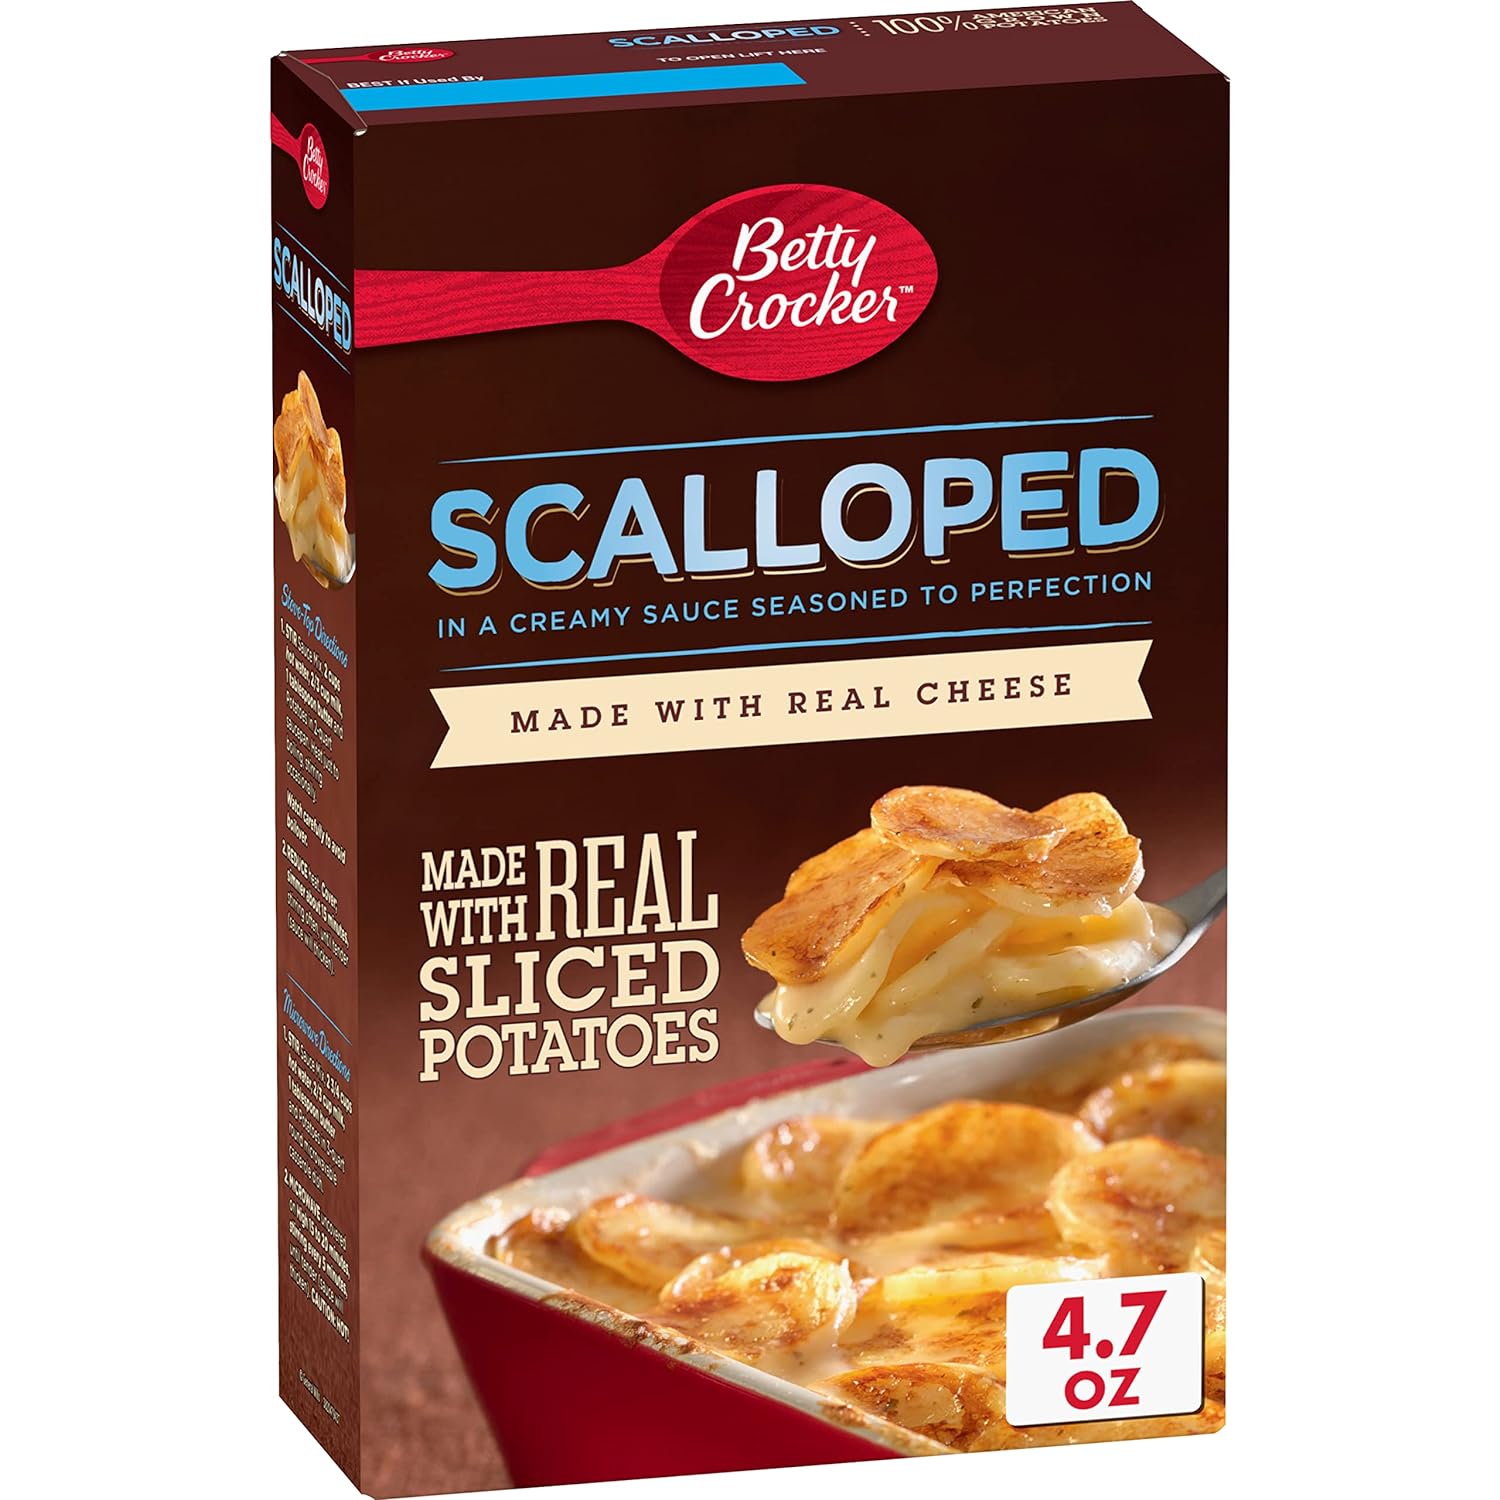 Betty Crocker Scalloped Potatoes, Made with Real Cheese, 4.7 oz